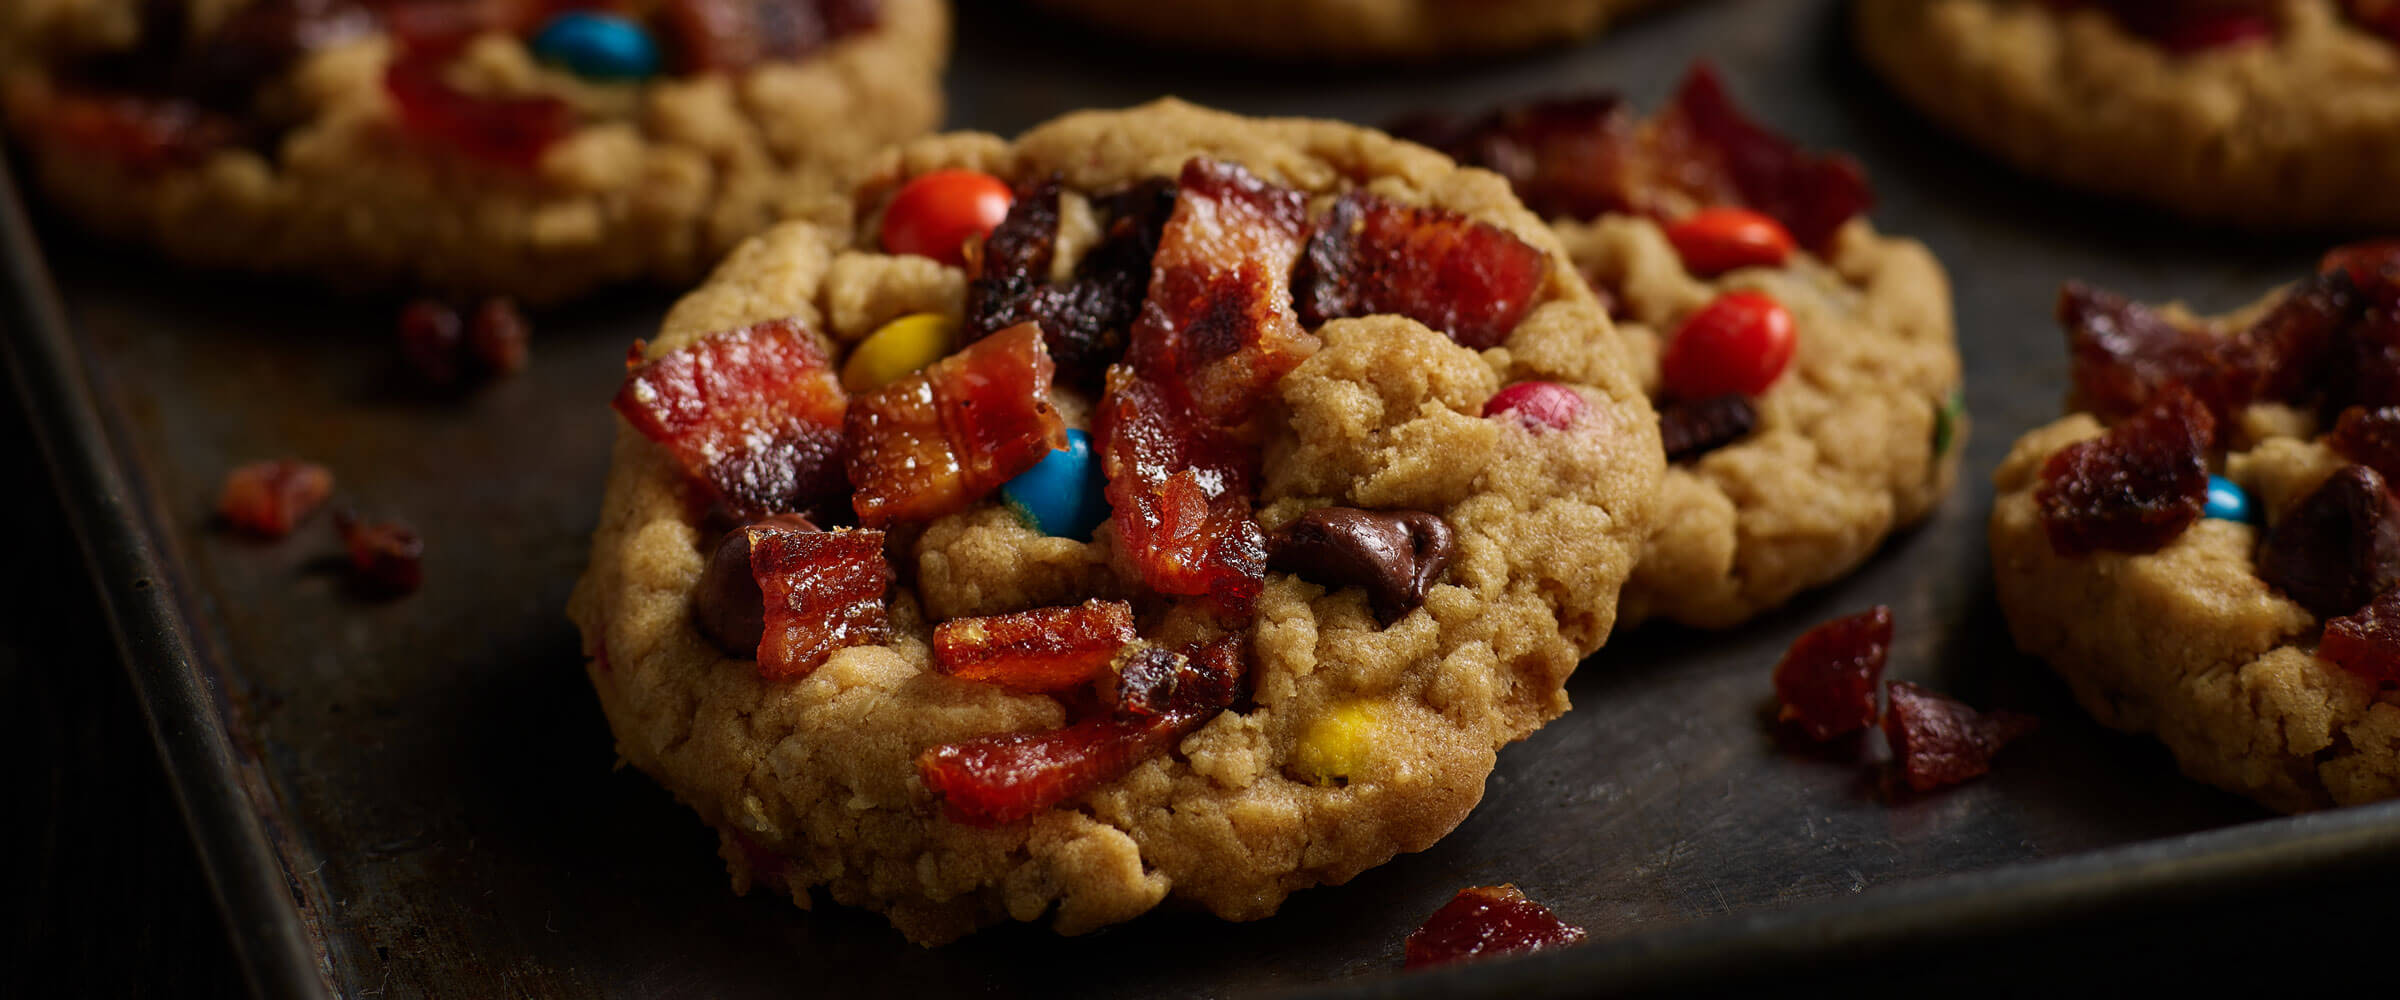 Candied Bacon Monster Cookies on serving tray